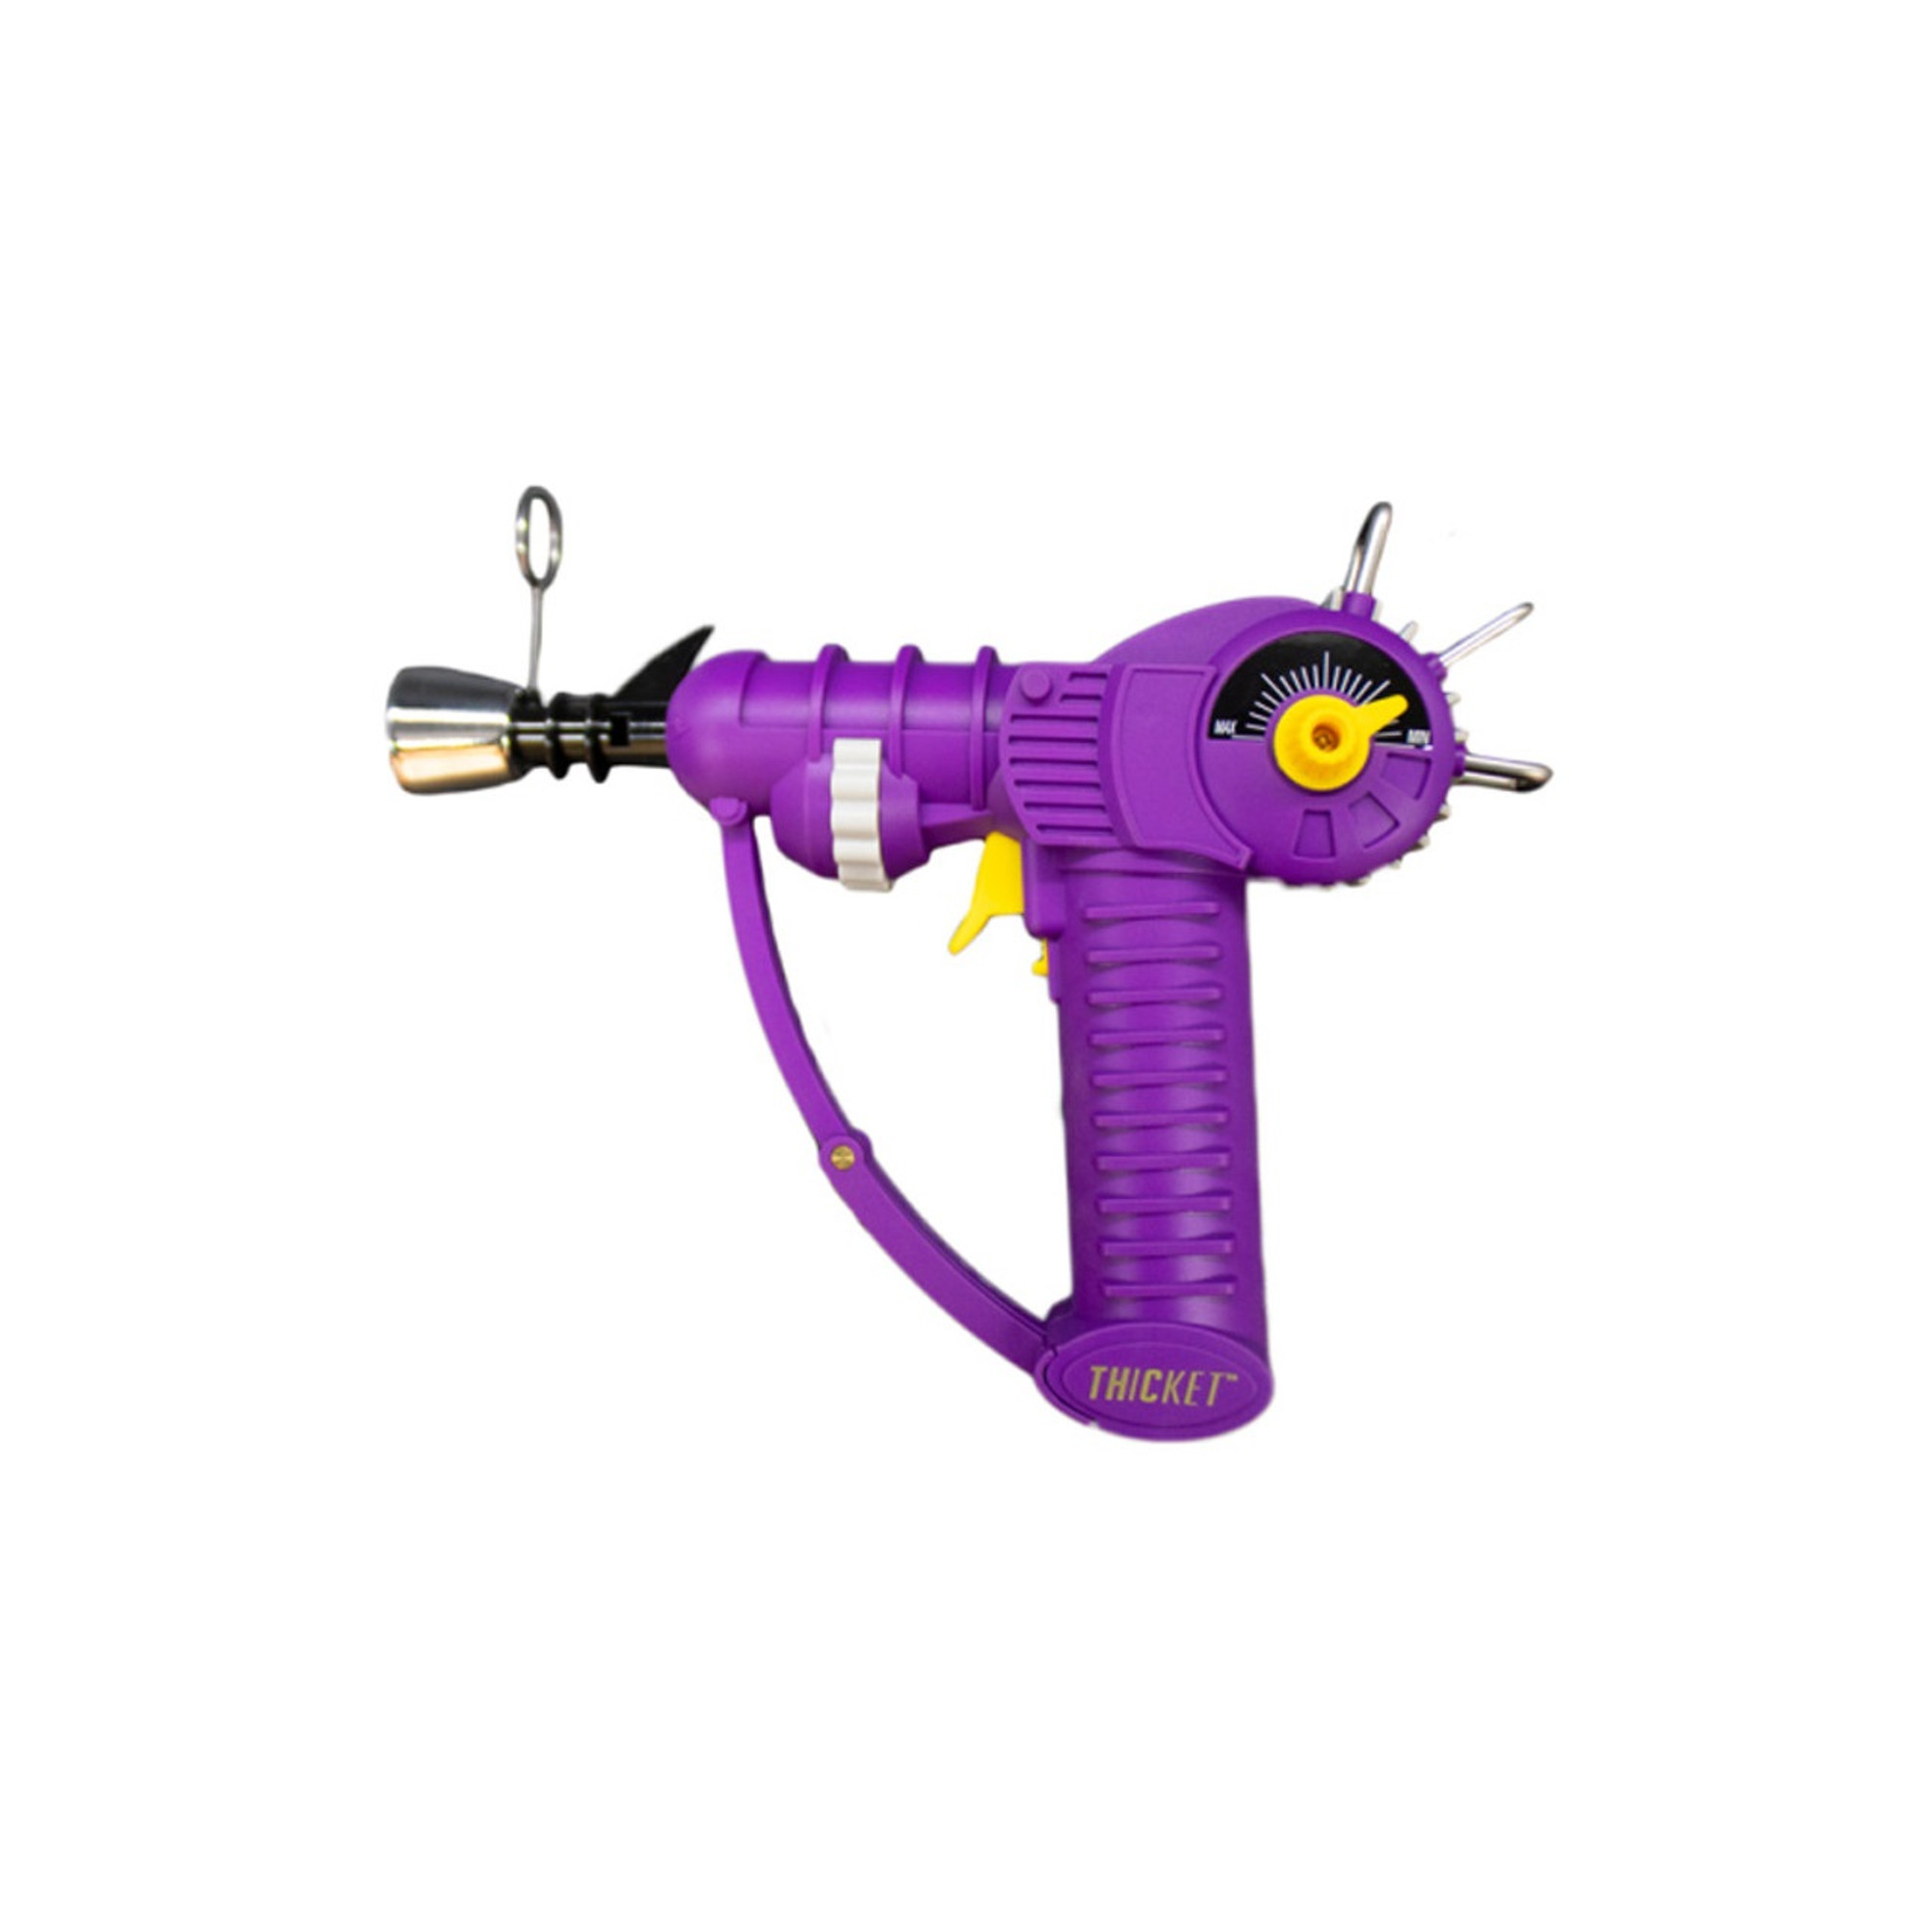 Thicket - Spaceout Ray Gun Torch